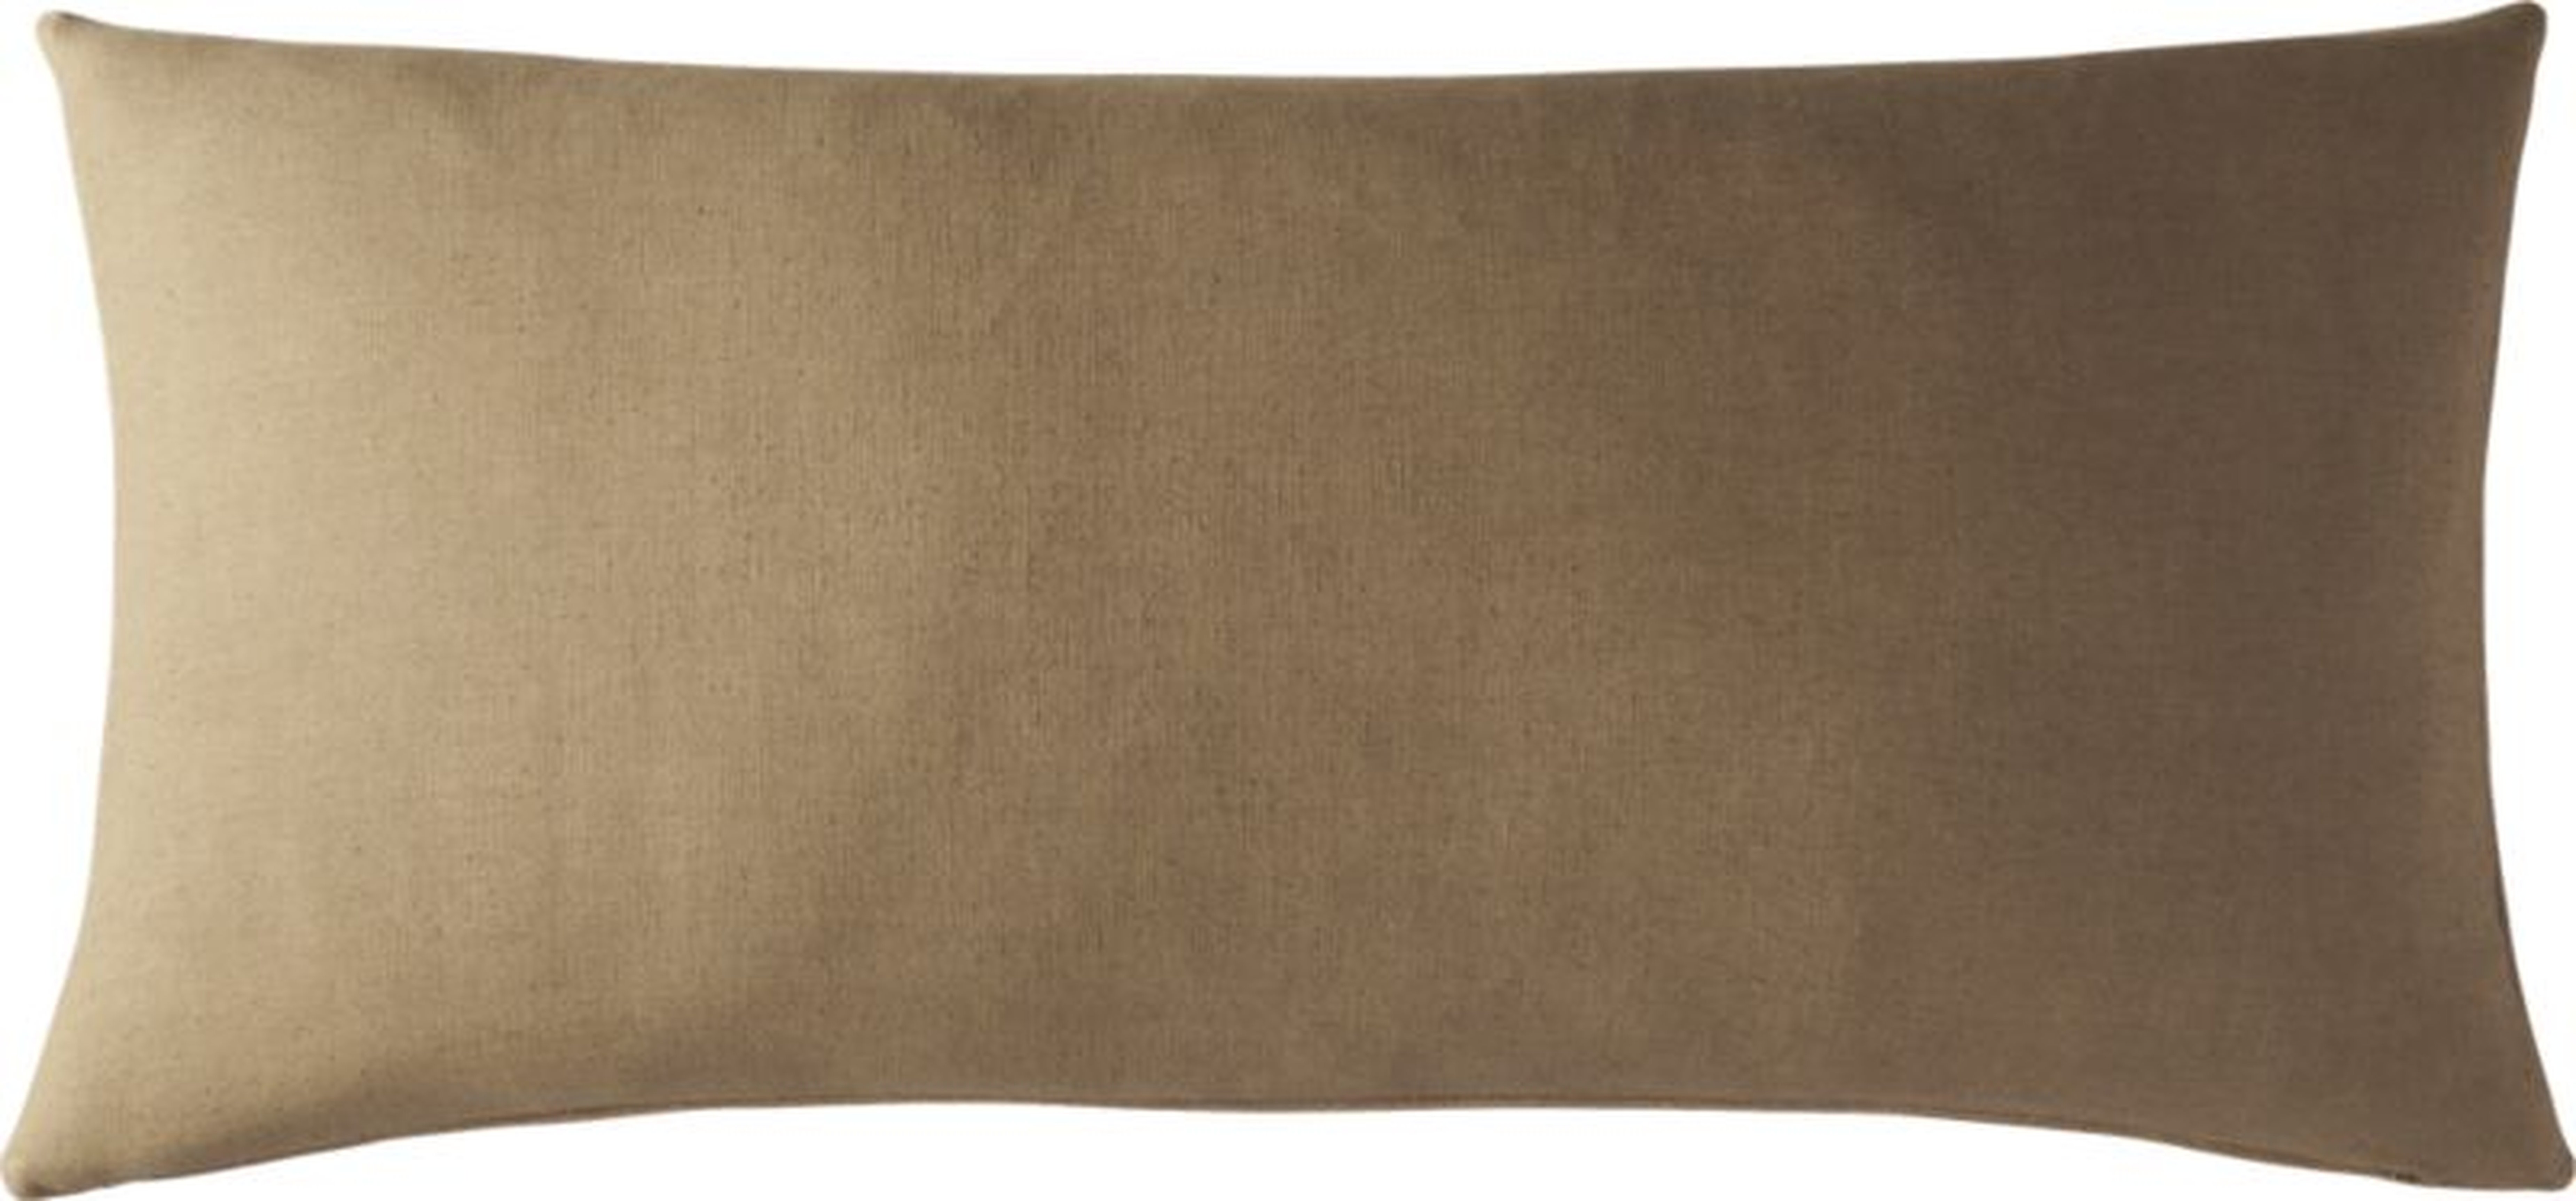 23"X11" SUEDE CAMEL TAN PILLOW WITH DOWN-ALTERNATIVE INSERT - CB2